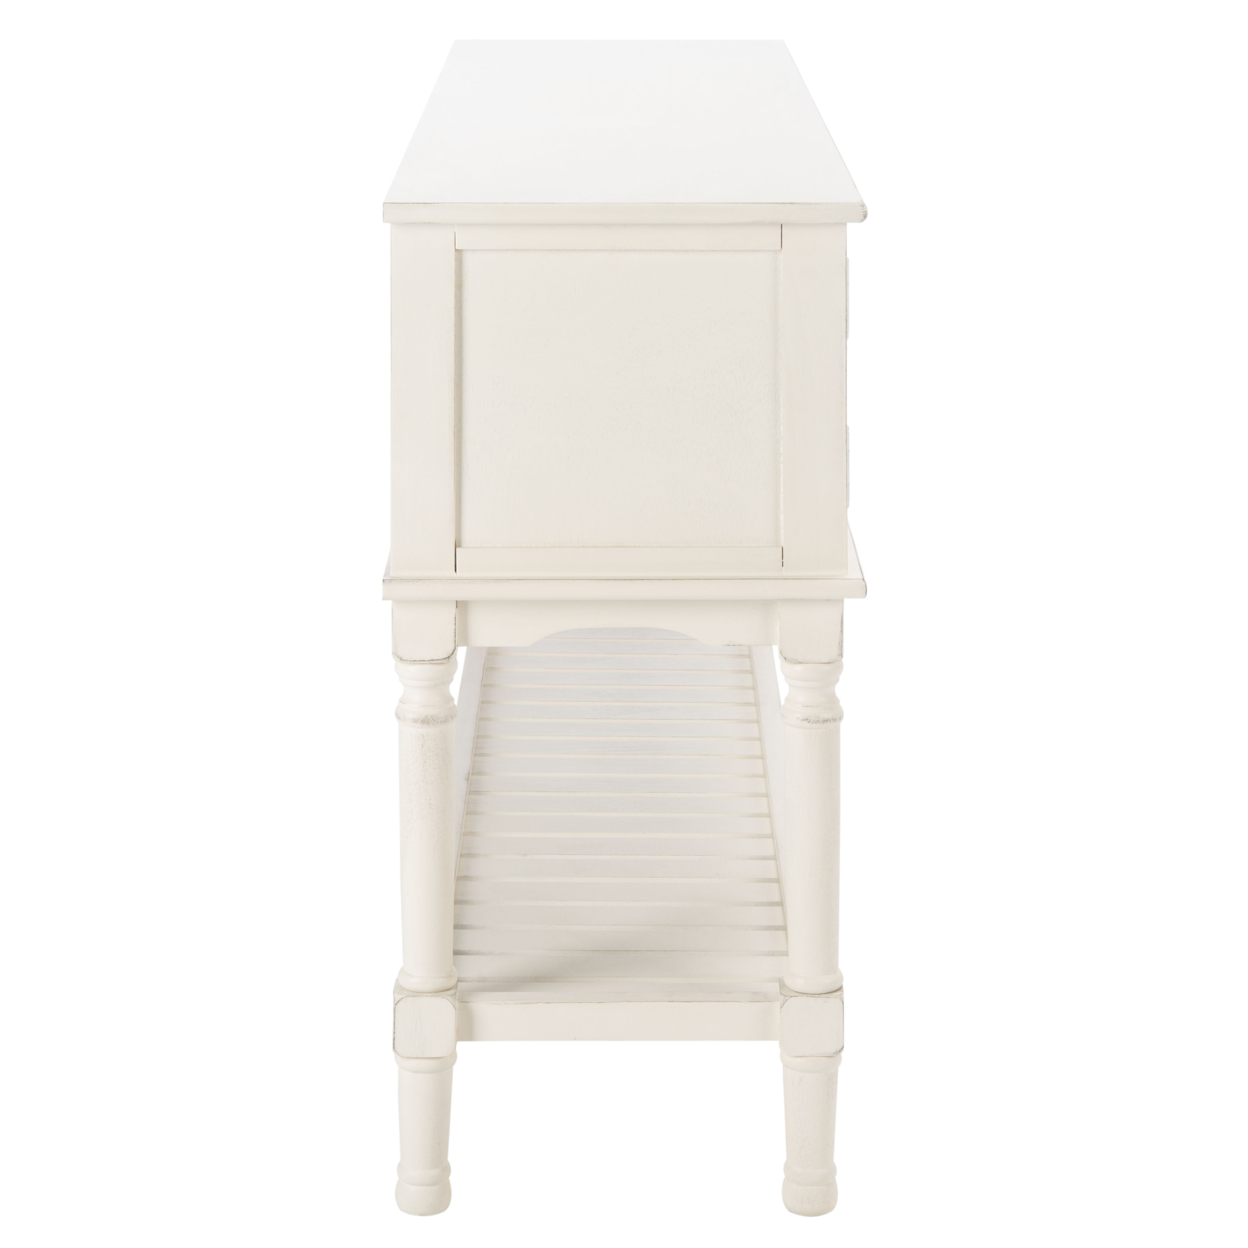 SAFAVIEH Tate 2-Drawer 2-Door Console Table Distressed / White